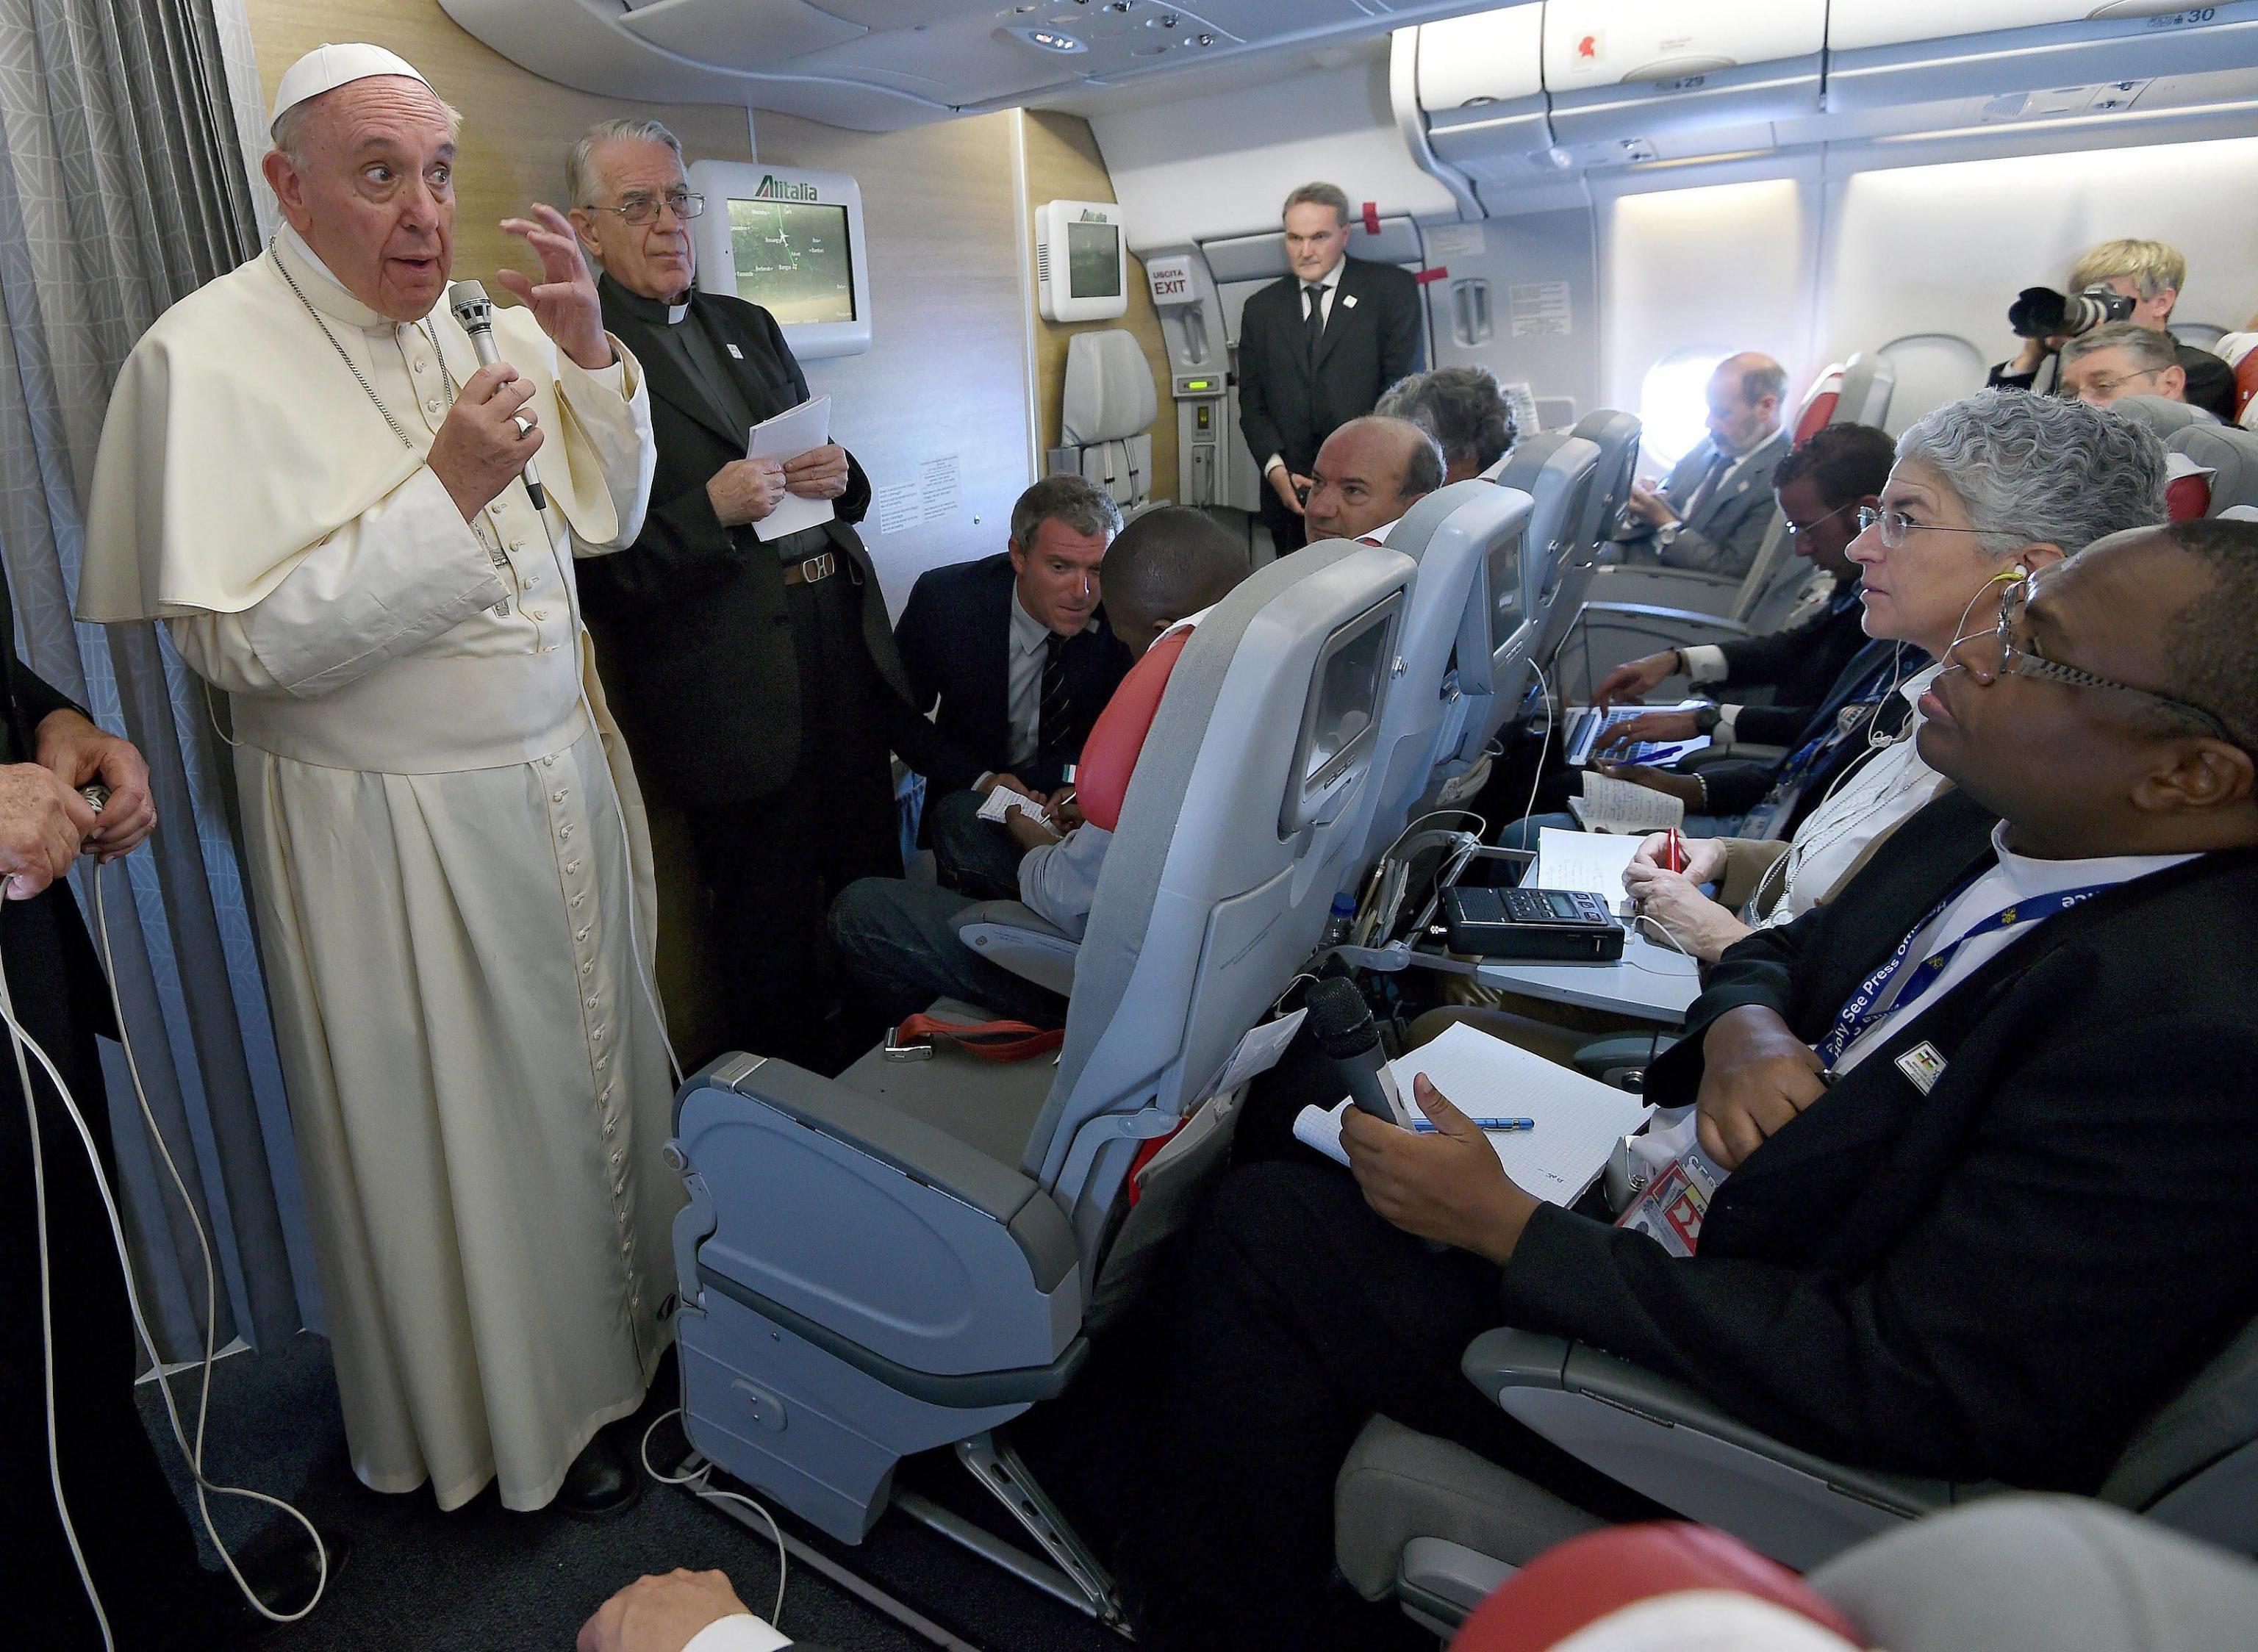 Pope Francis' homeflight from Bangui to Rome